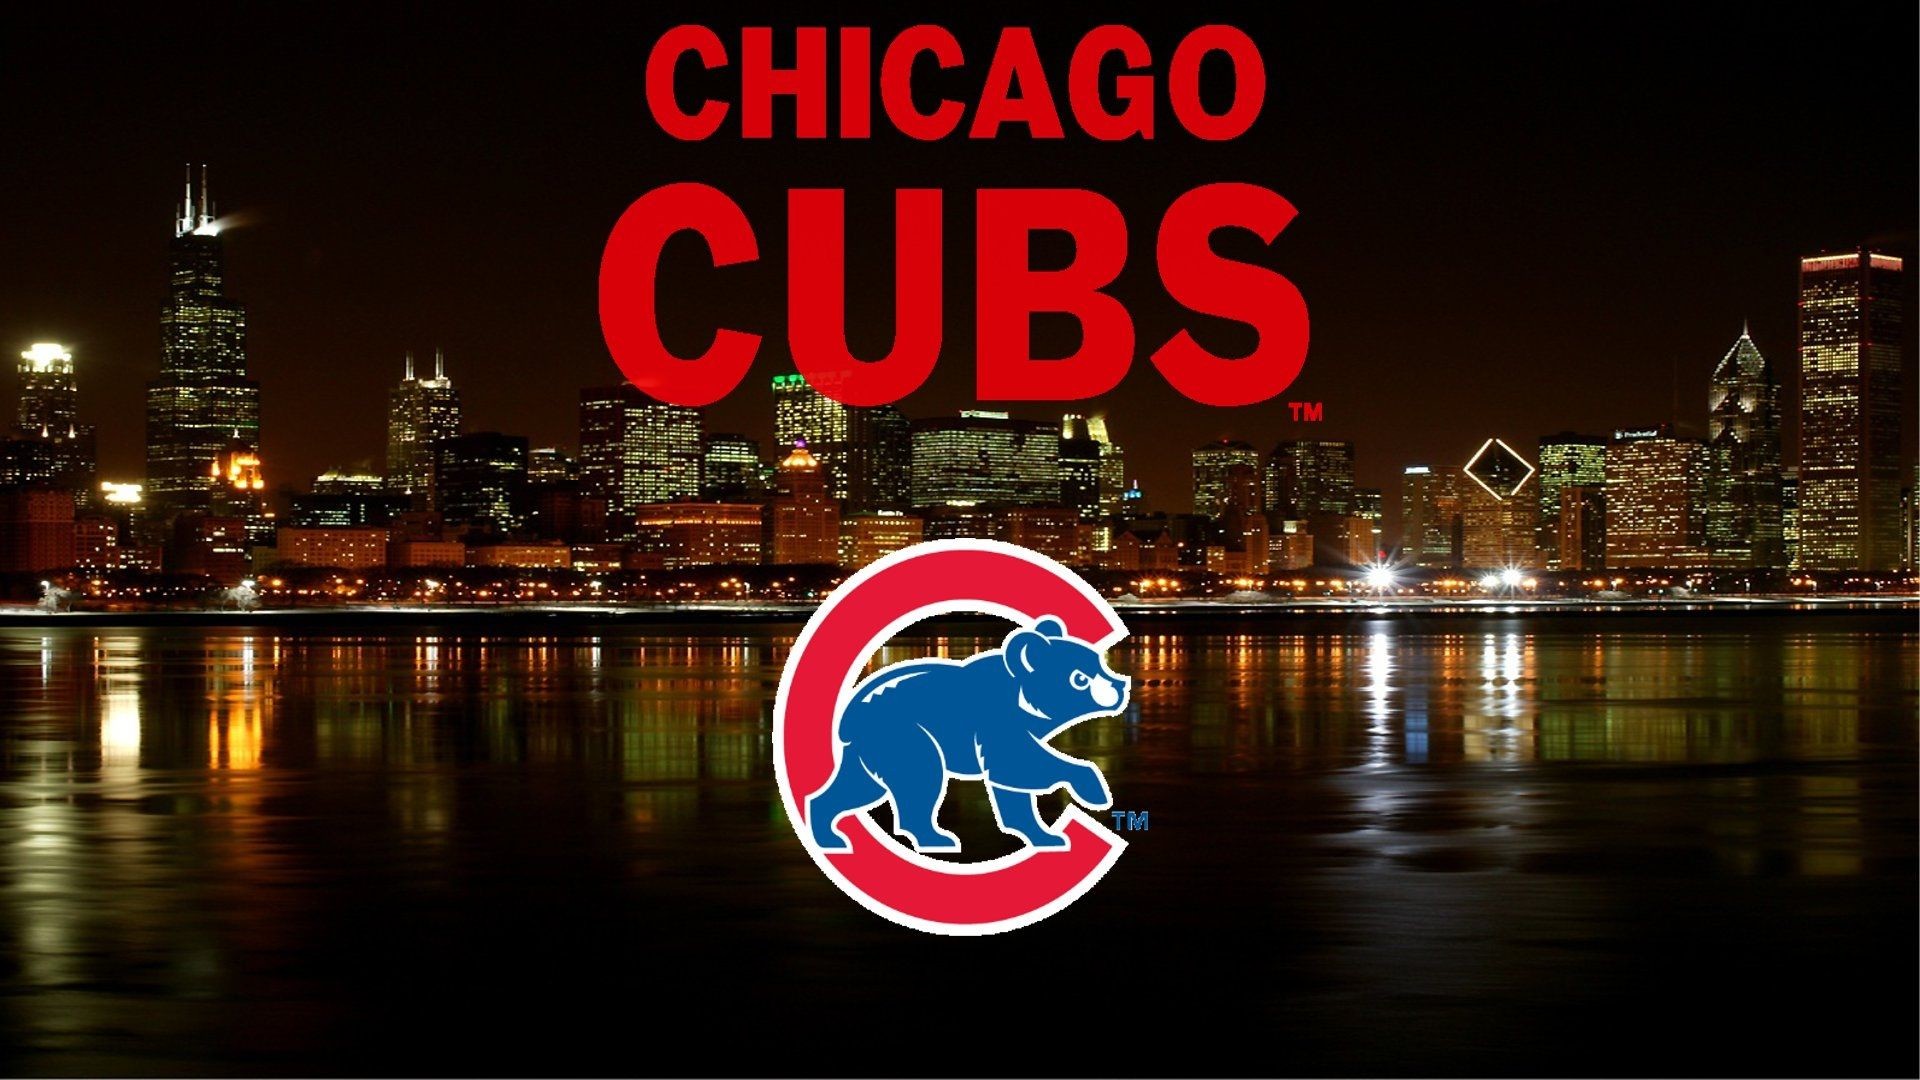 1920x1080 This evening, the Chicago Cubs will be playing the St.